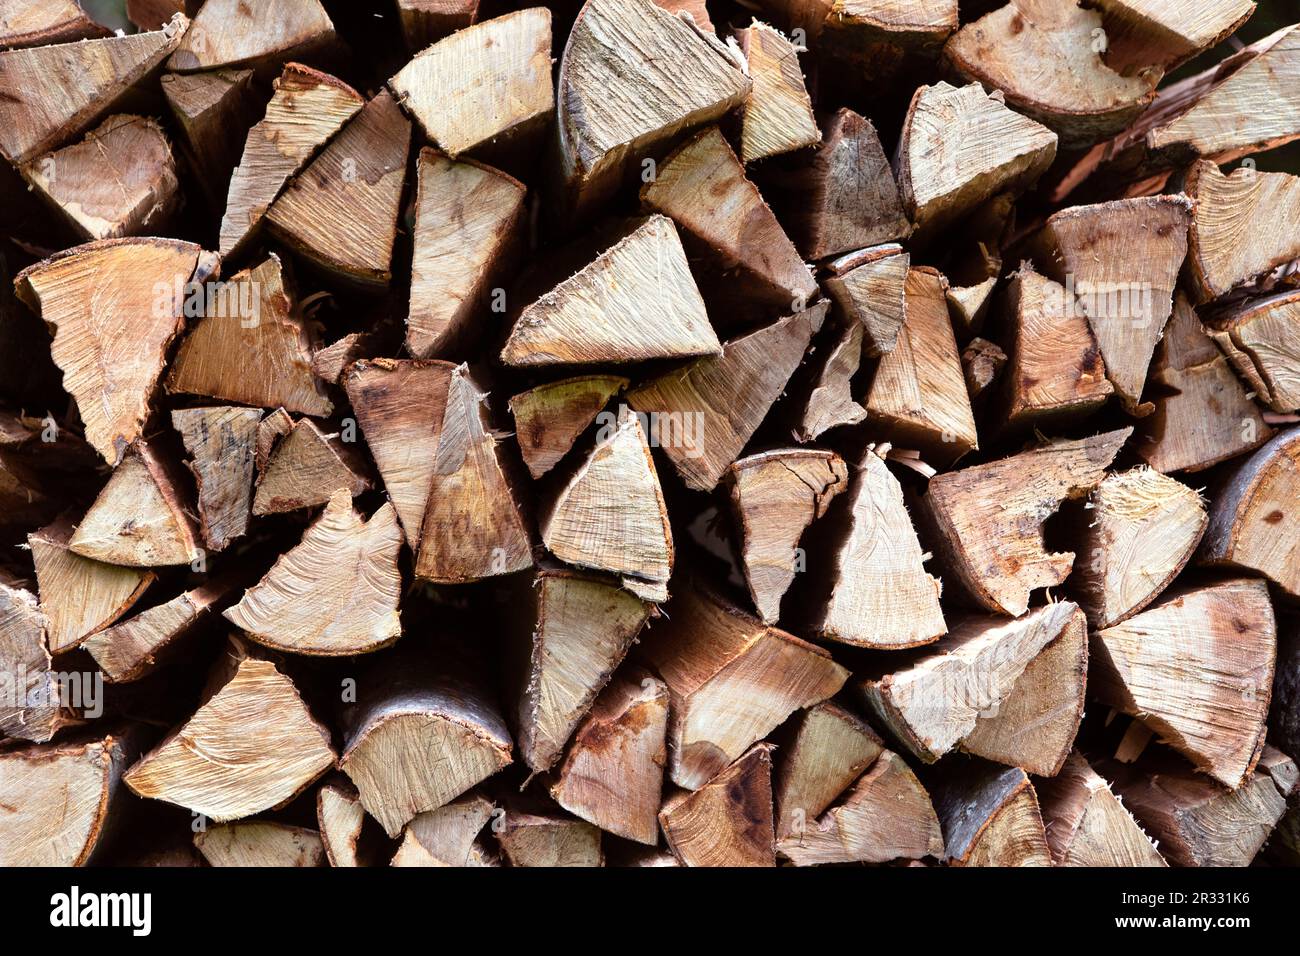 Texture of chopped wood. Wood for burning in the stove or fireplace. Pile of wood pieces background. Stock Photo